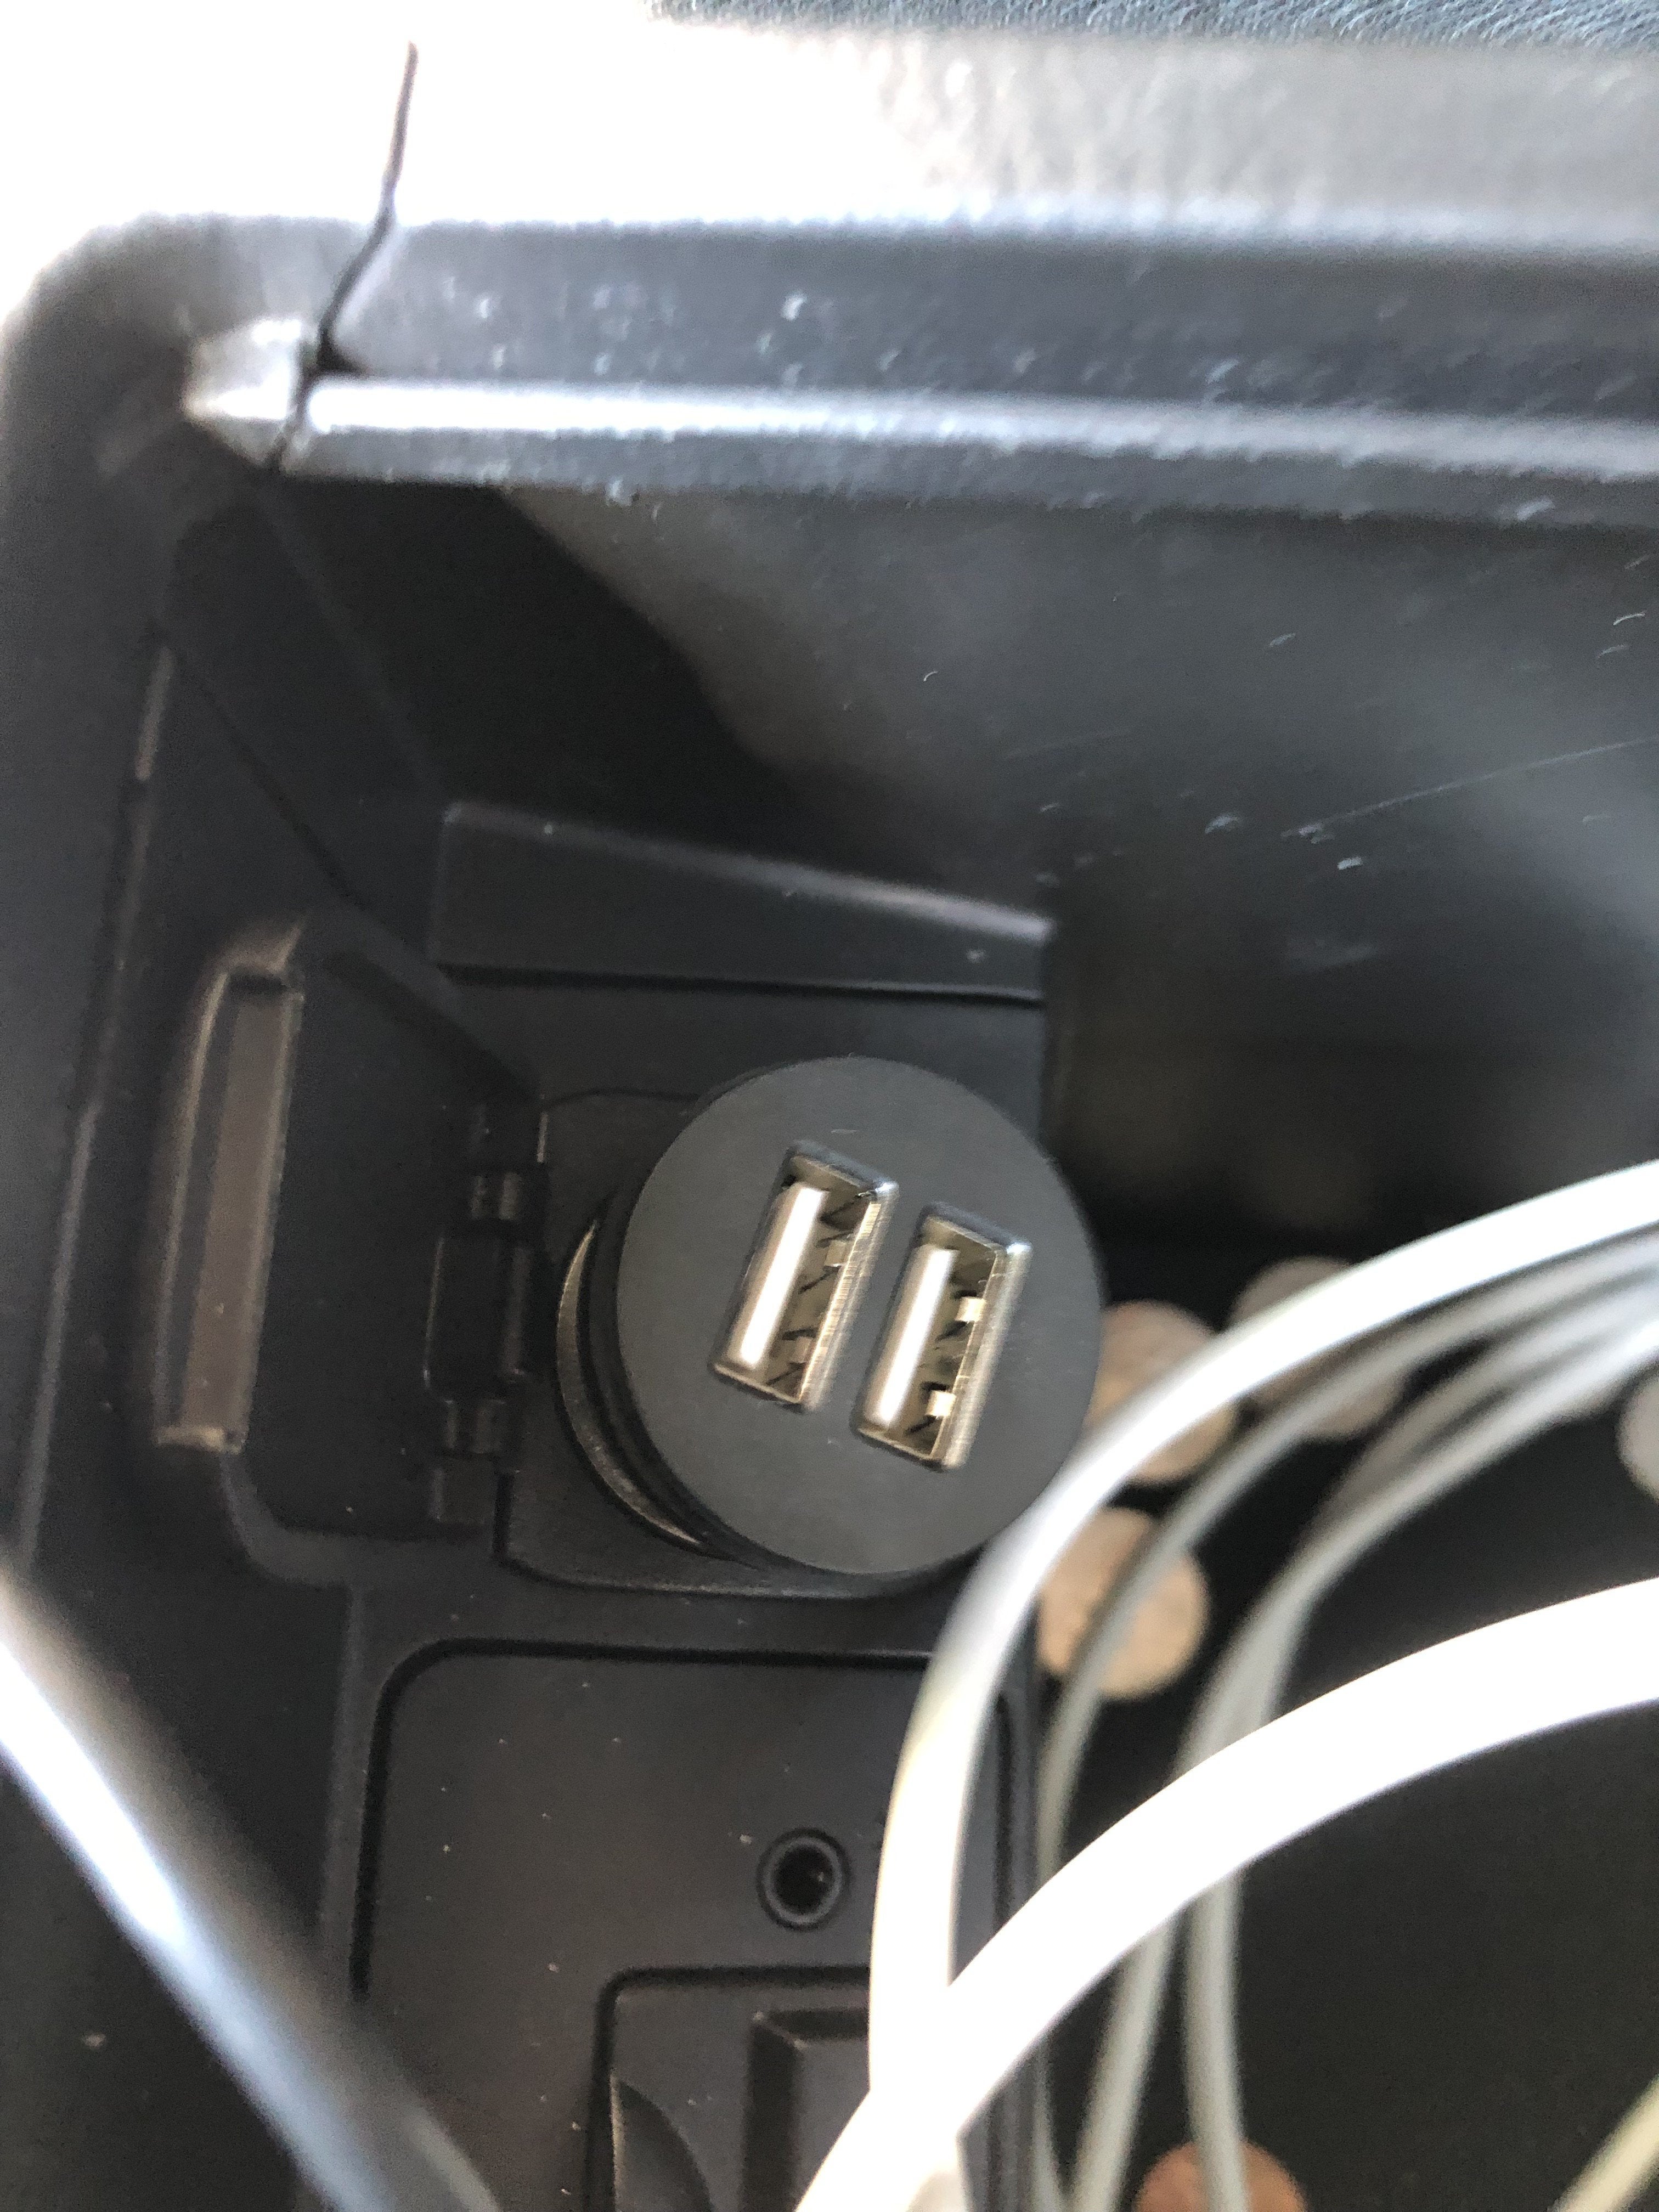 Does Leaving Usb in Car Drain Battery?